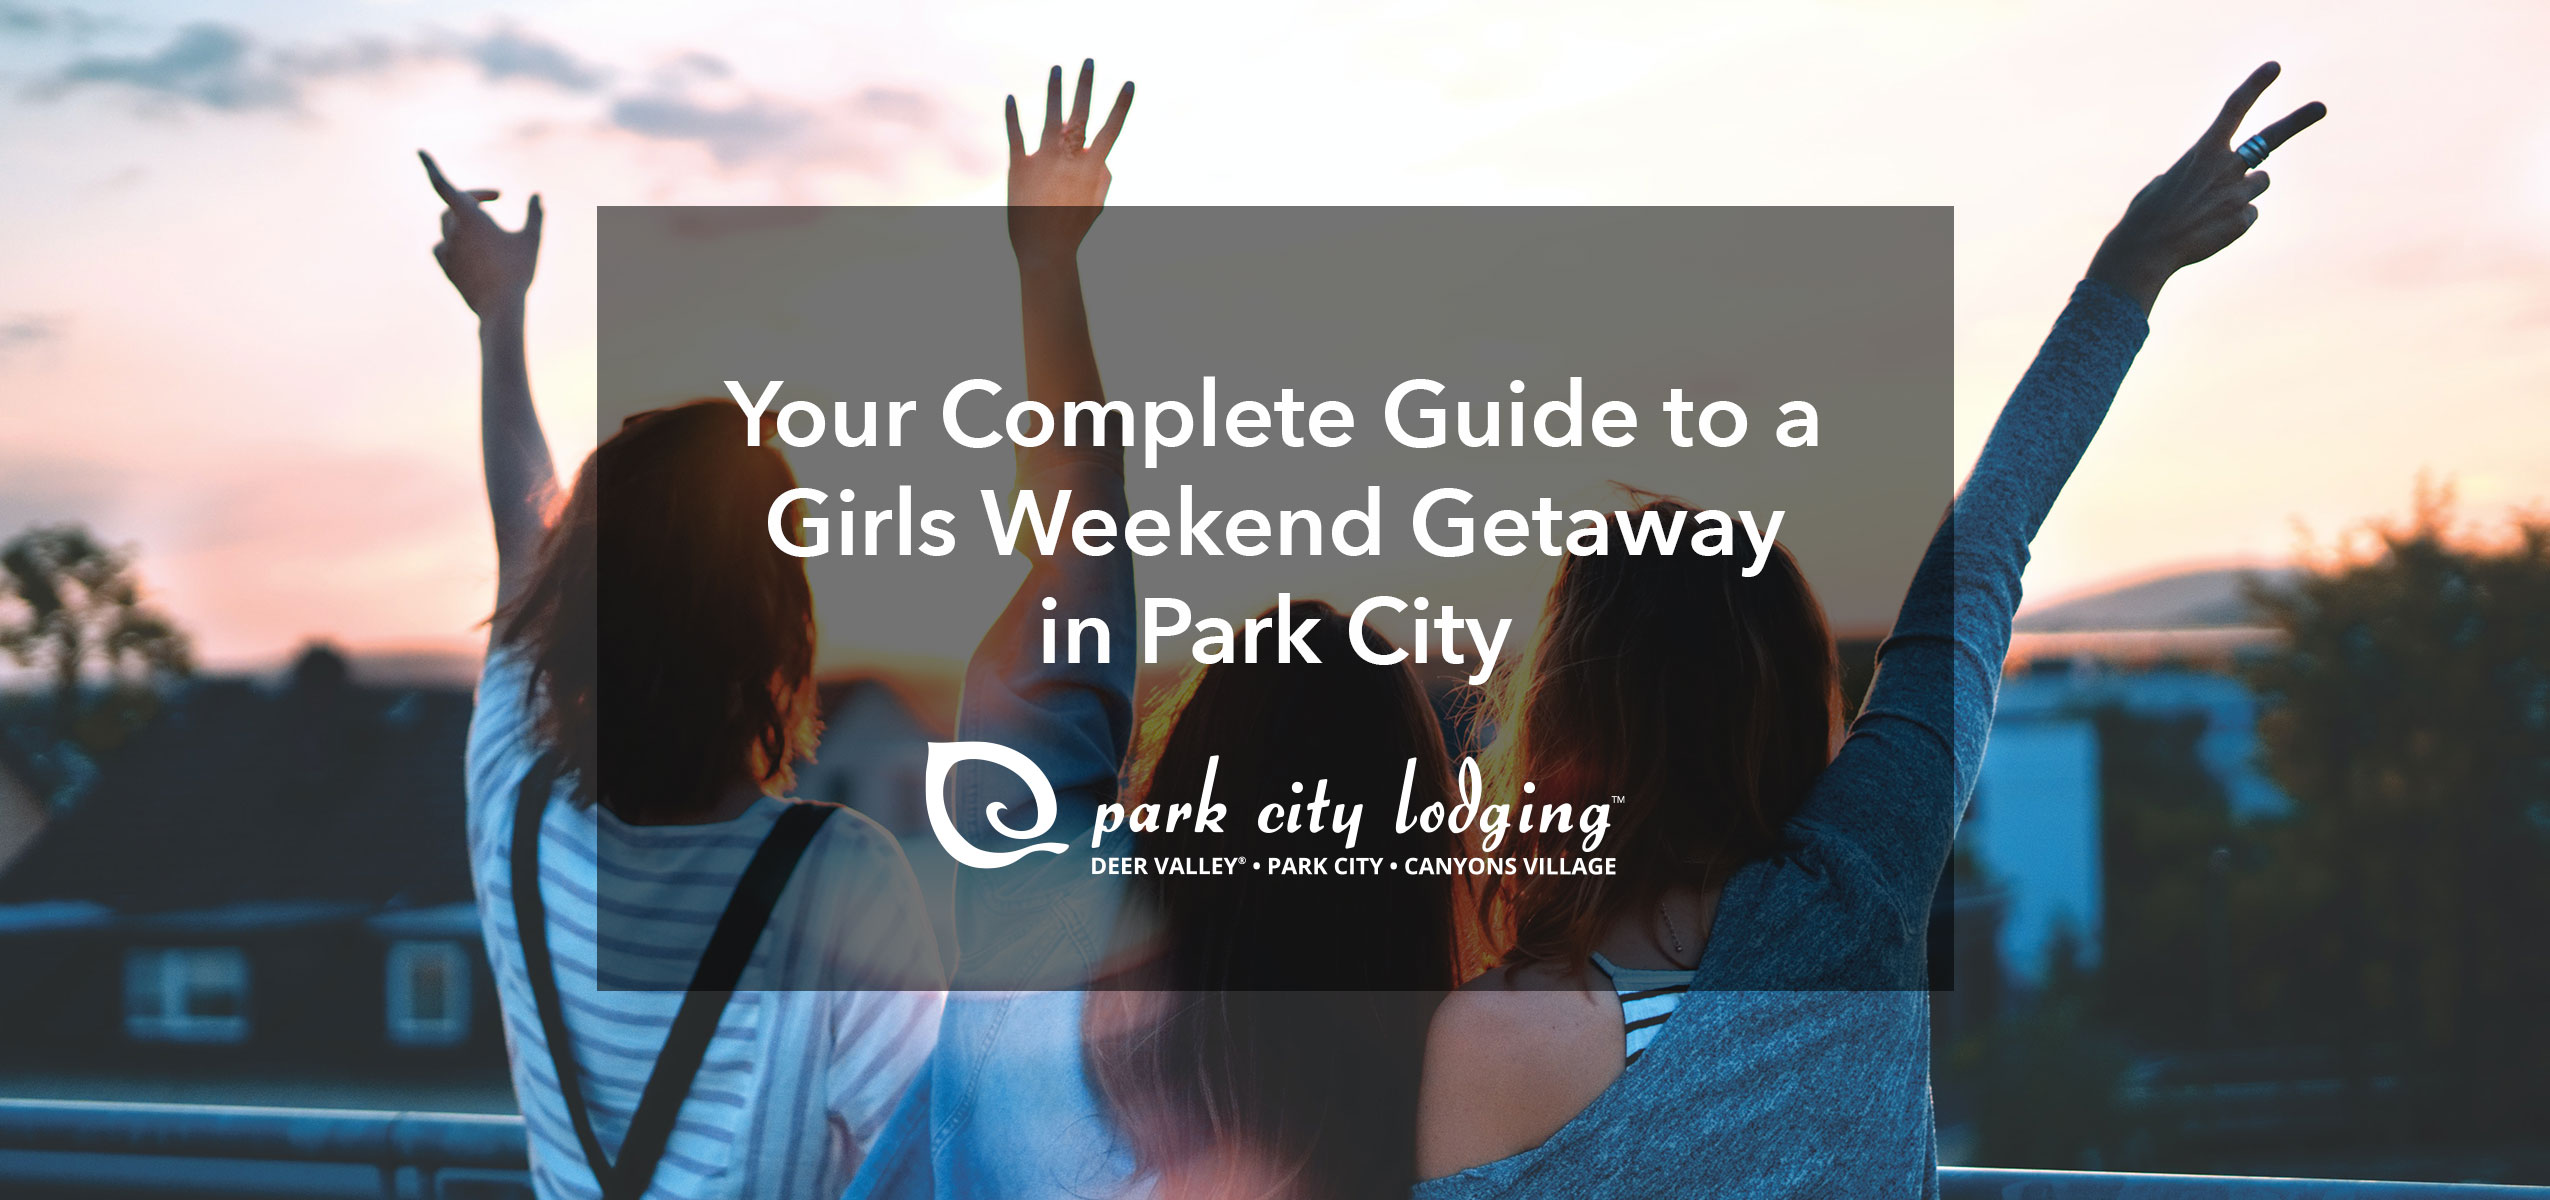 Your Complete Guide to a Girls Weekend Getaway in Park City